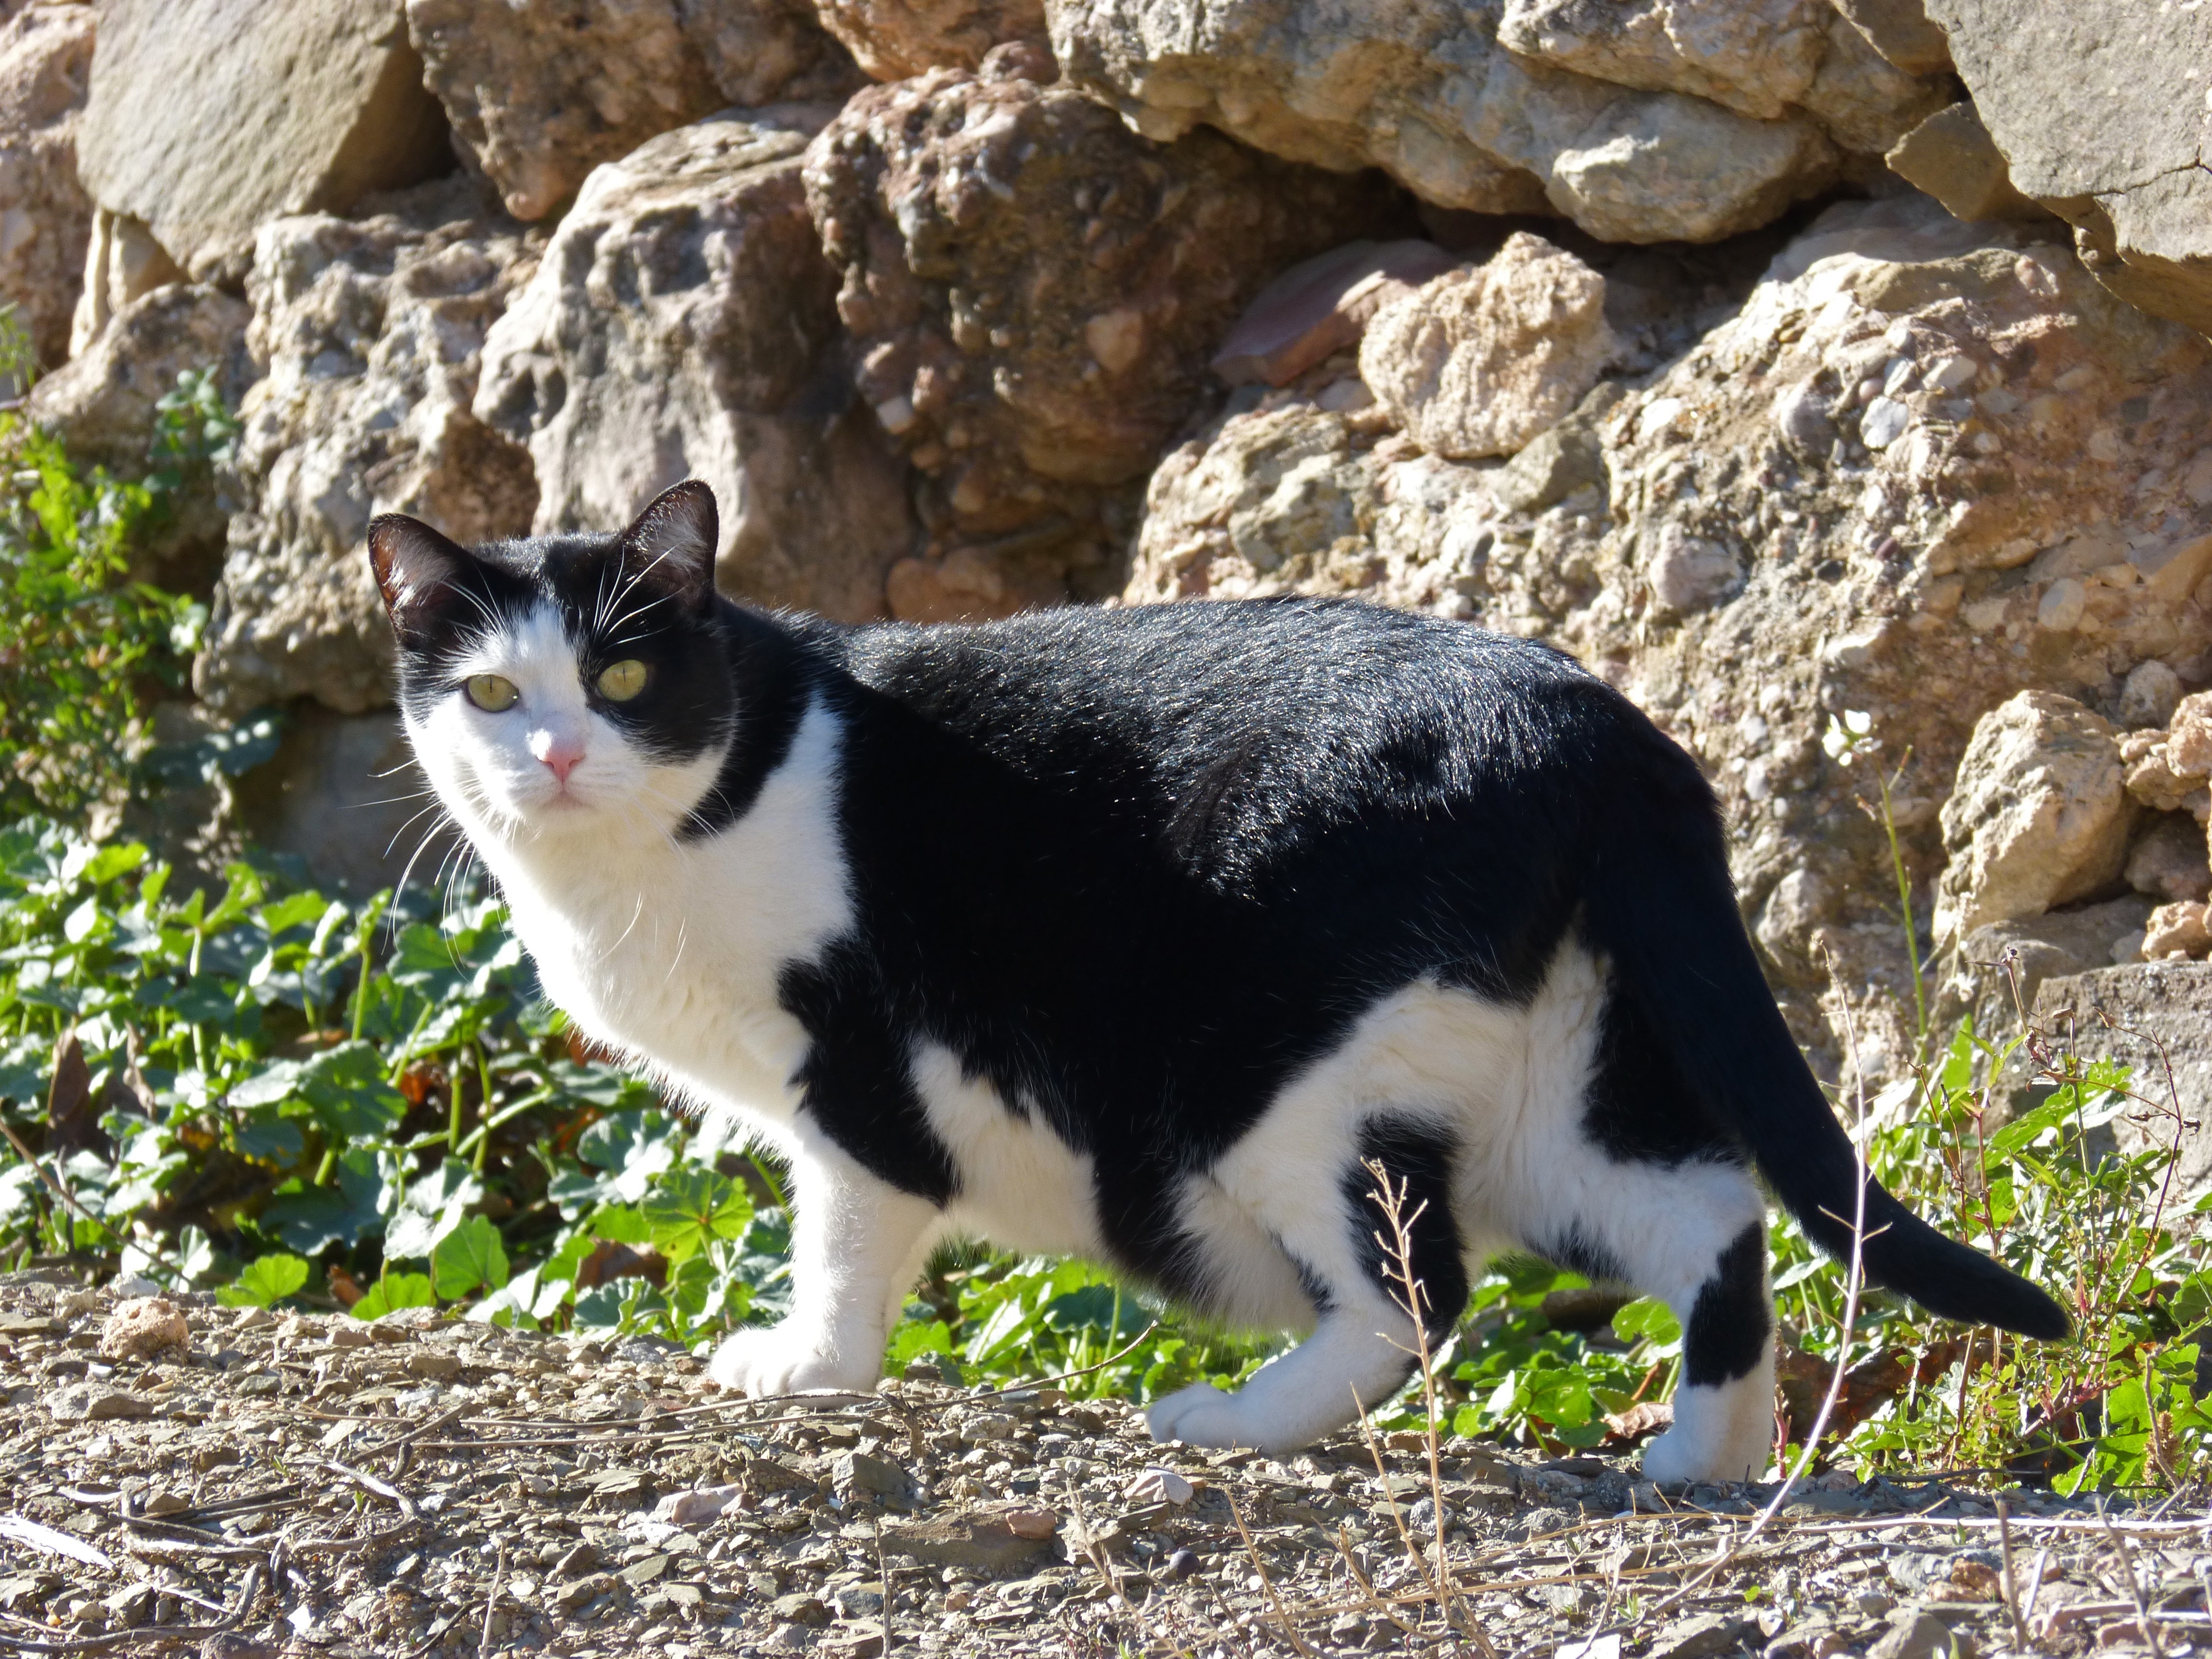 black and white bi color cat near gray rocks and green grasses during daytime